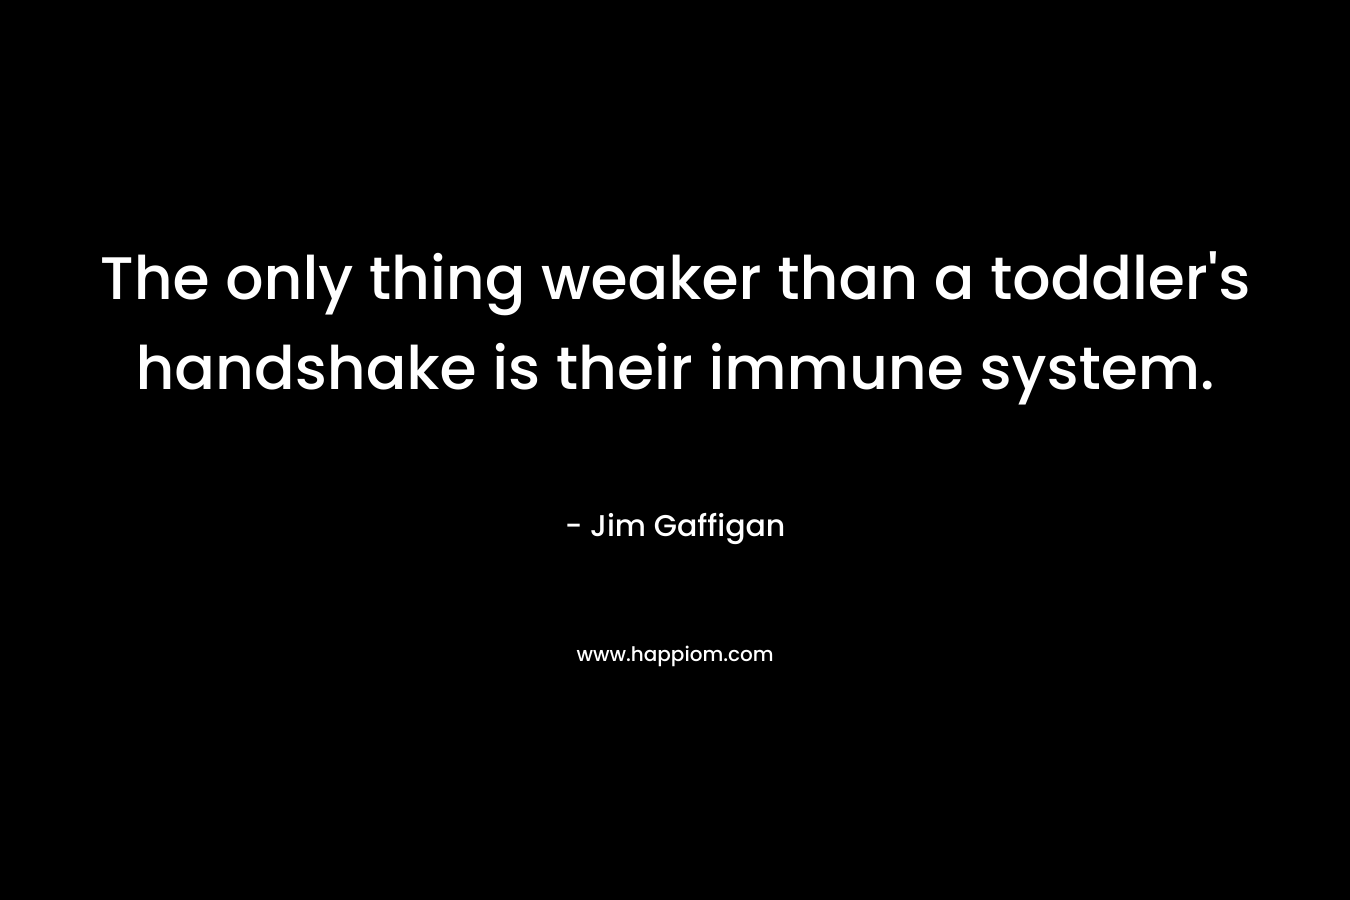 The only thing weaker than a toddler's handshake is their immune system.